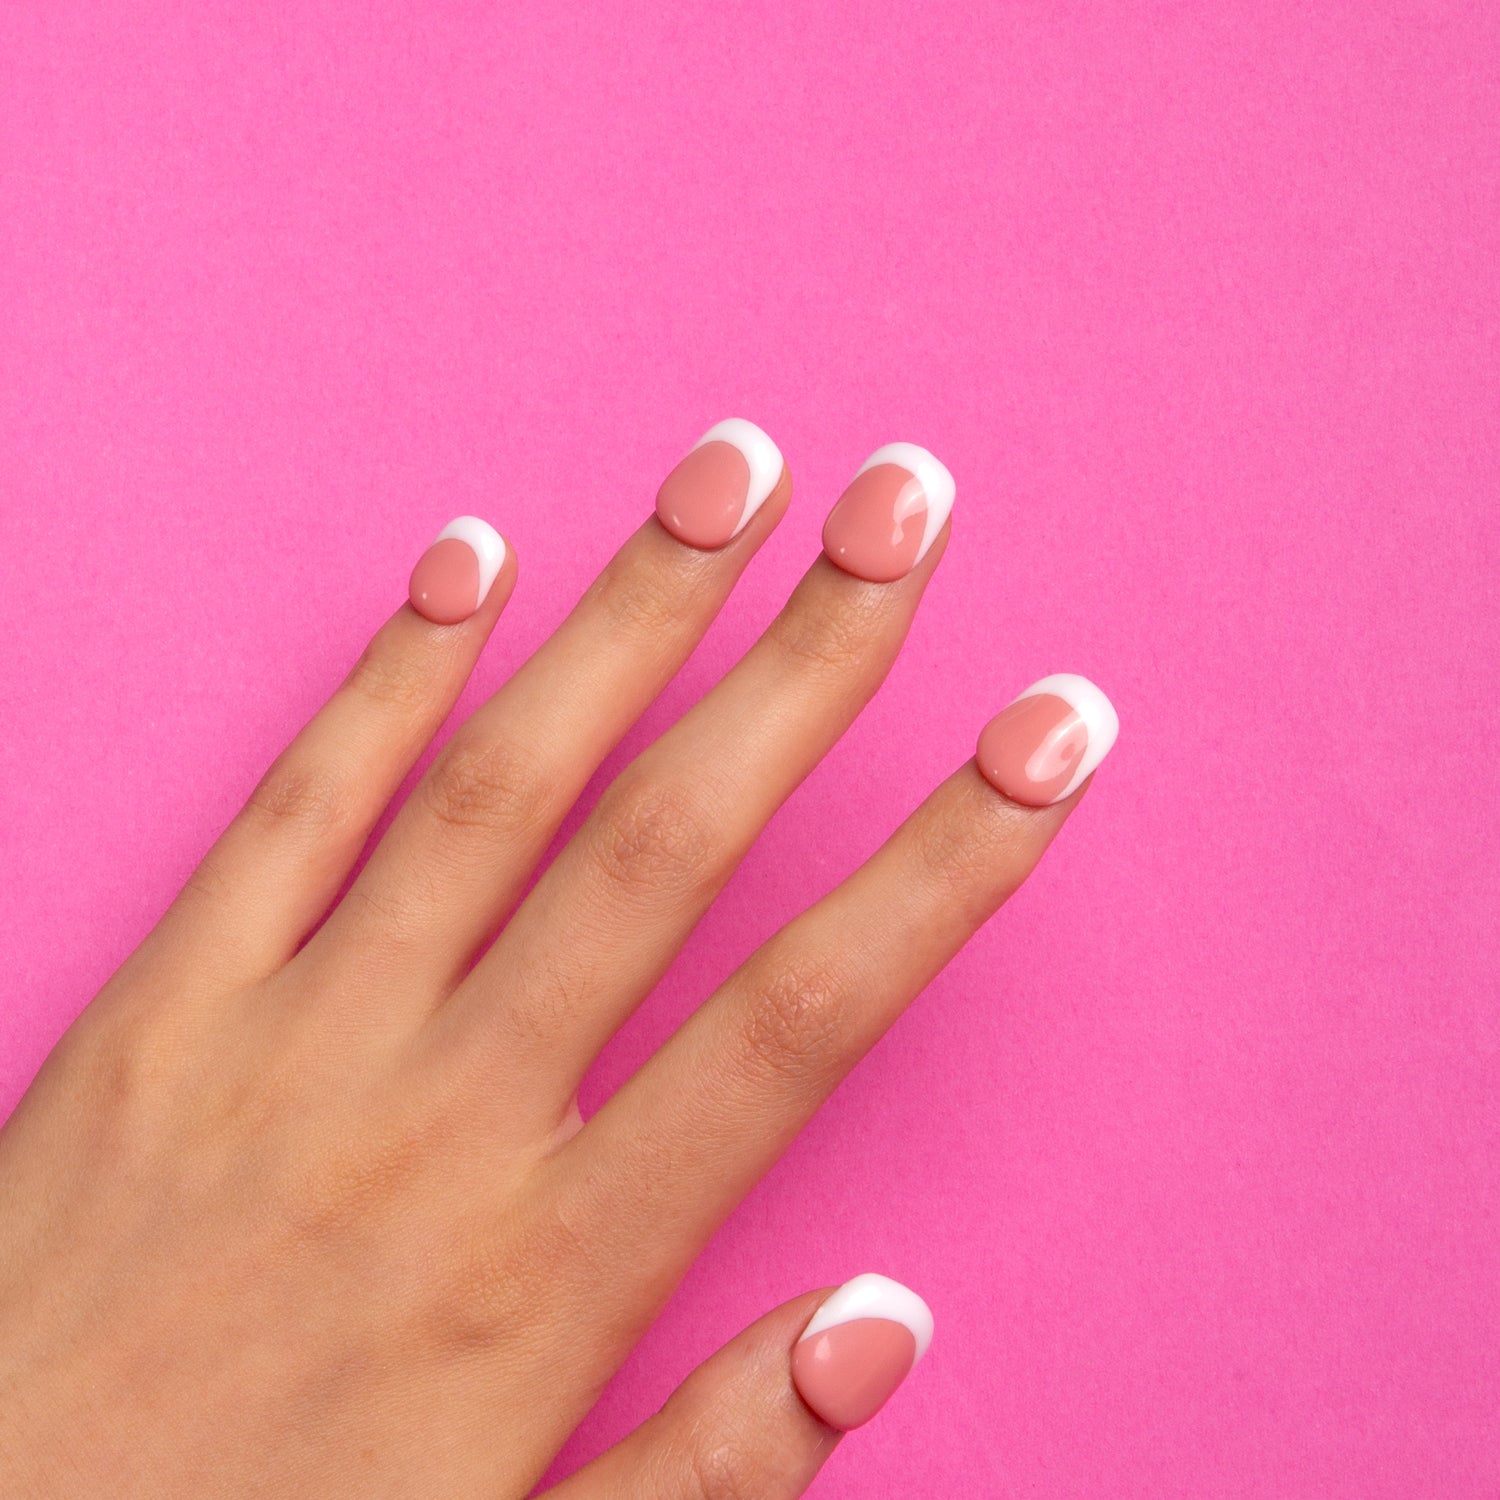 Hand with Coffee Latte French Tip Press-On Nails against a pink background, showcasing square-shaped nails with white tips and coffee-colored bases for a chic, elegant look.